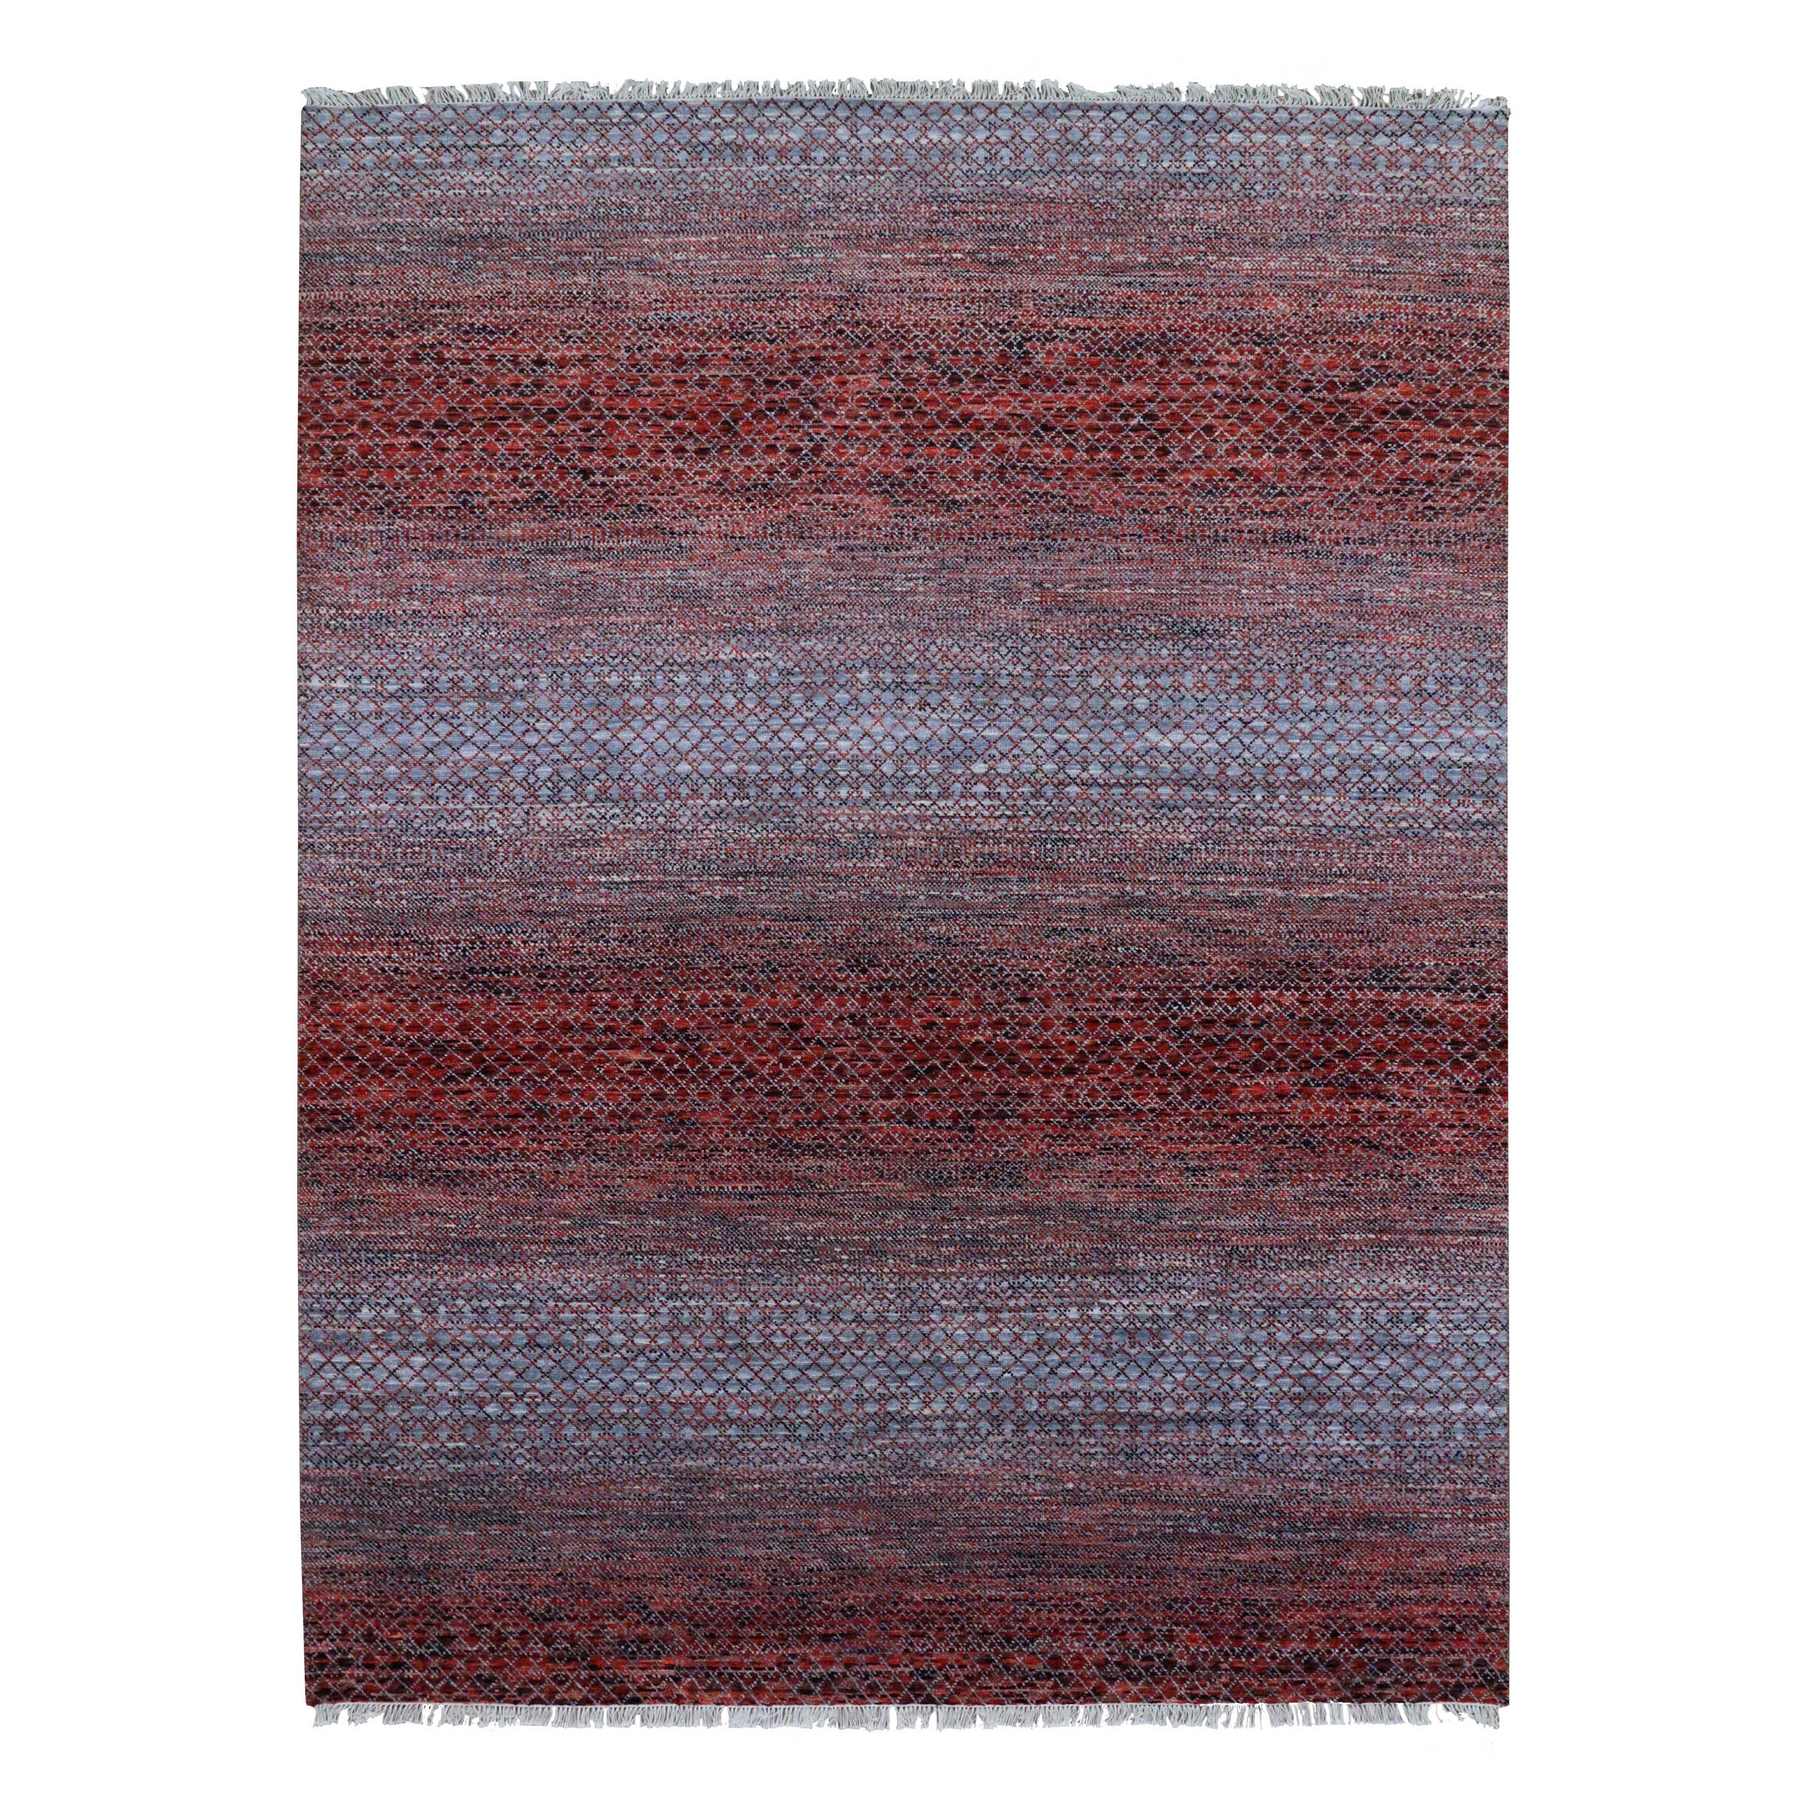 9'1"x12'1" Brownish Red, Hand Woven Modern Chiaroscuro Collection, Thick and Plush Pure Wool, Oriental Rug 